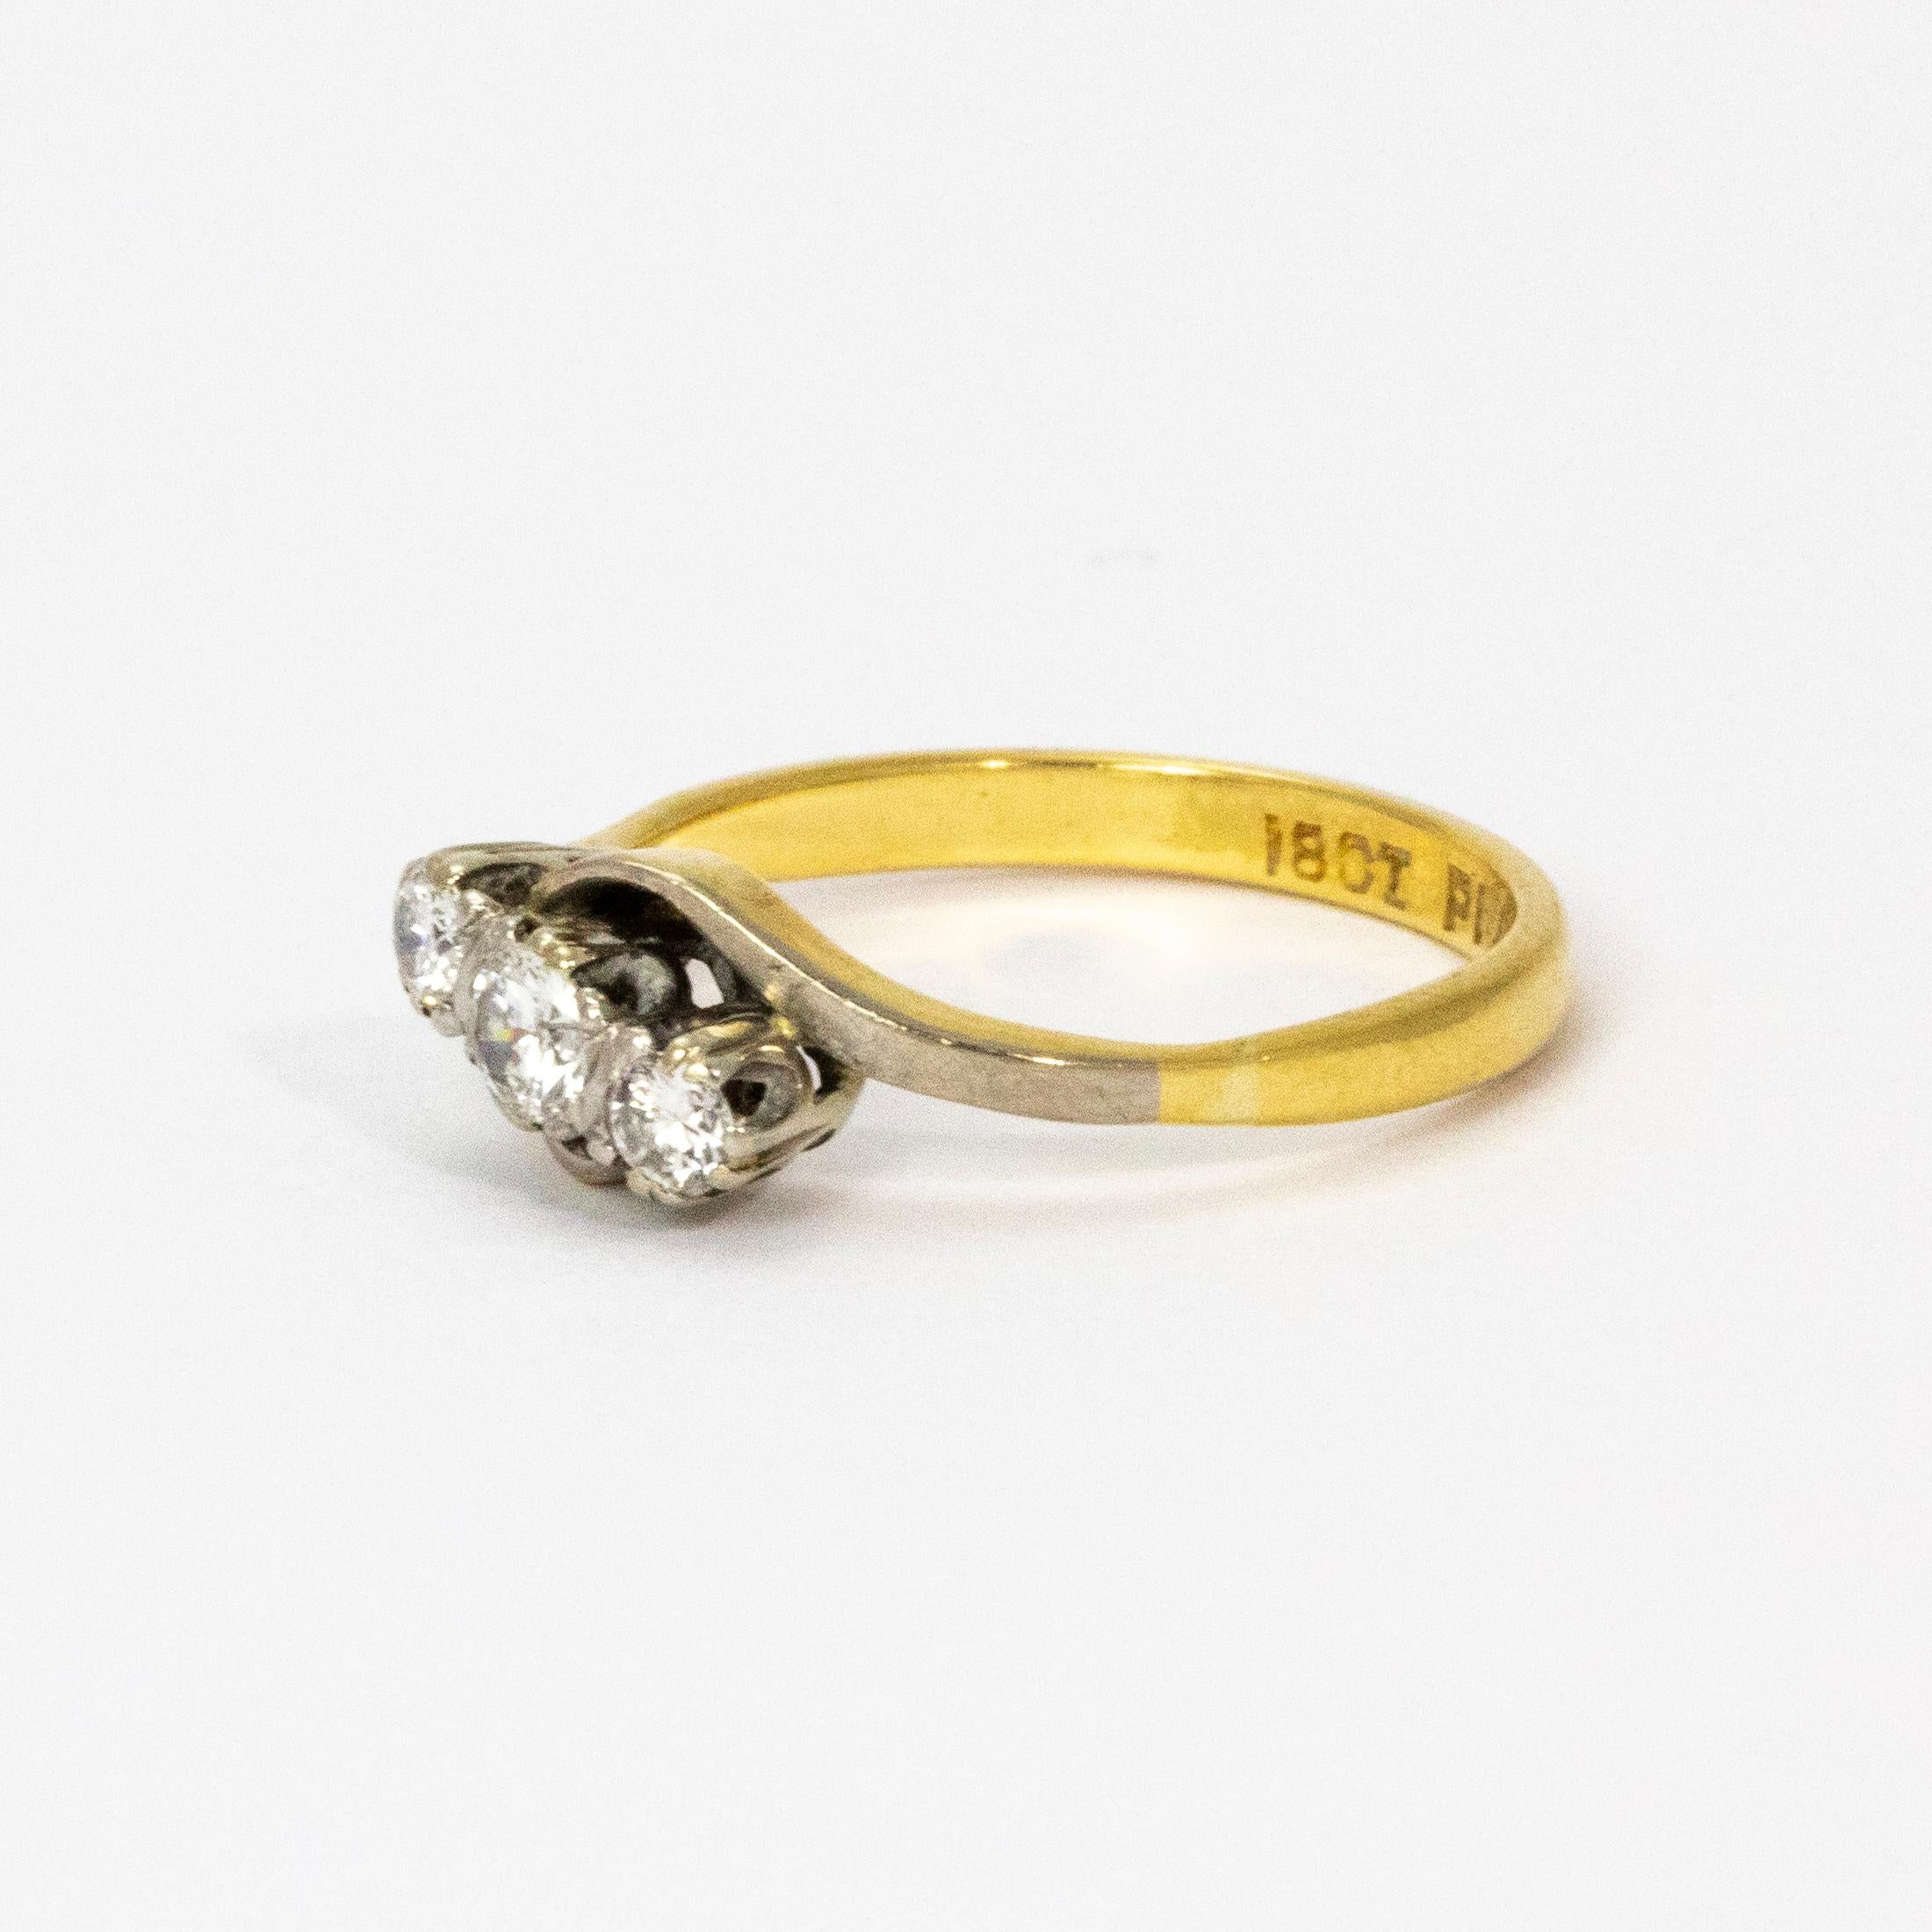 An elegant vintage three-stone ring, set with a diagonal row of beautiful old European cut diamonds. The stones are set in platinum which extends to the shoulders which have great curved design. Band Modelled in 18 karat yellow gold.

Ring Size: K